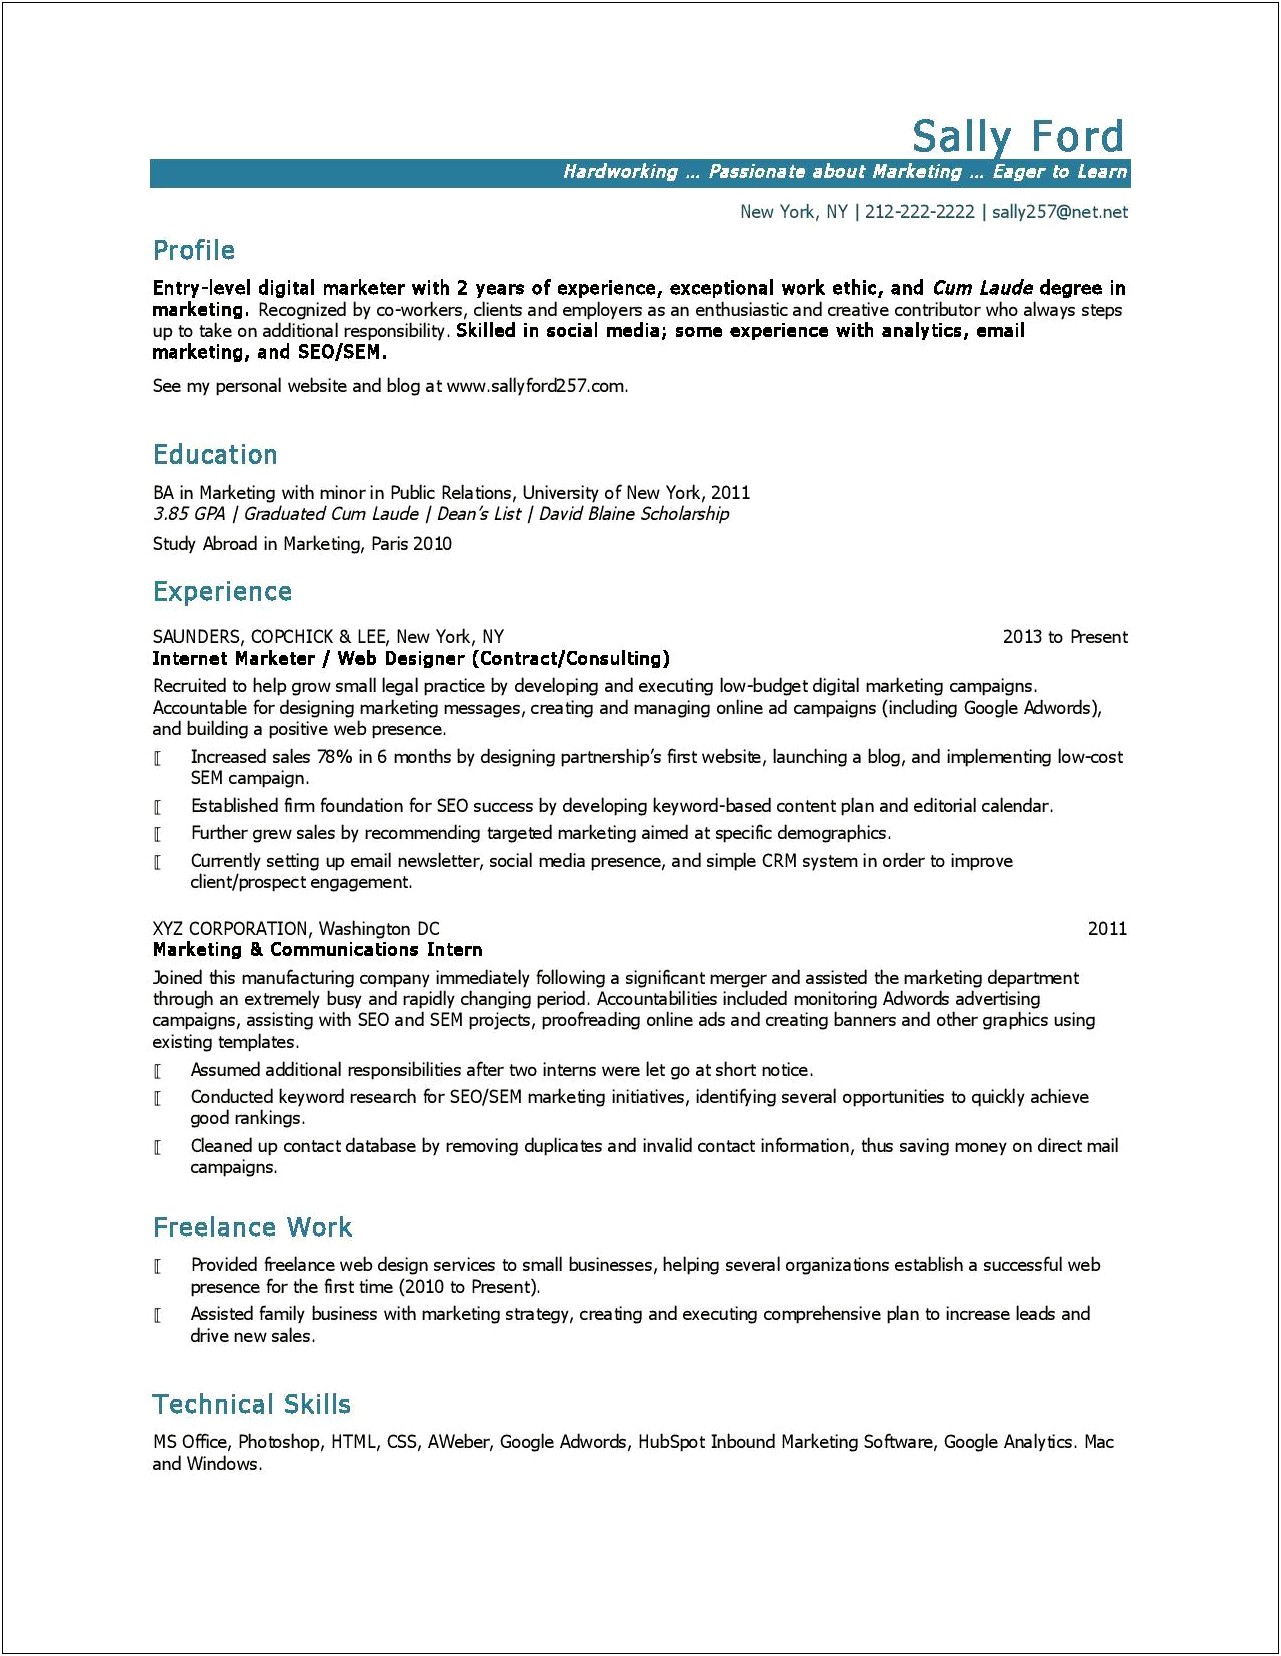 Digital Marketing Resume For 3 Years Experience